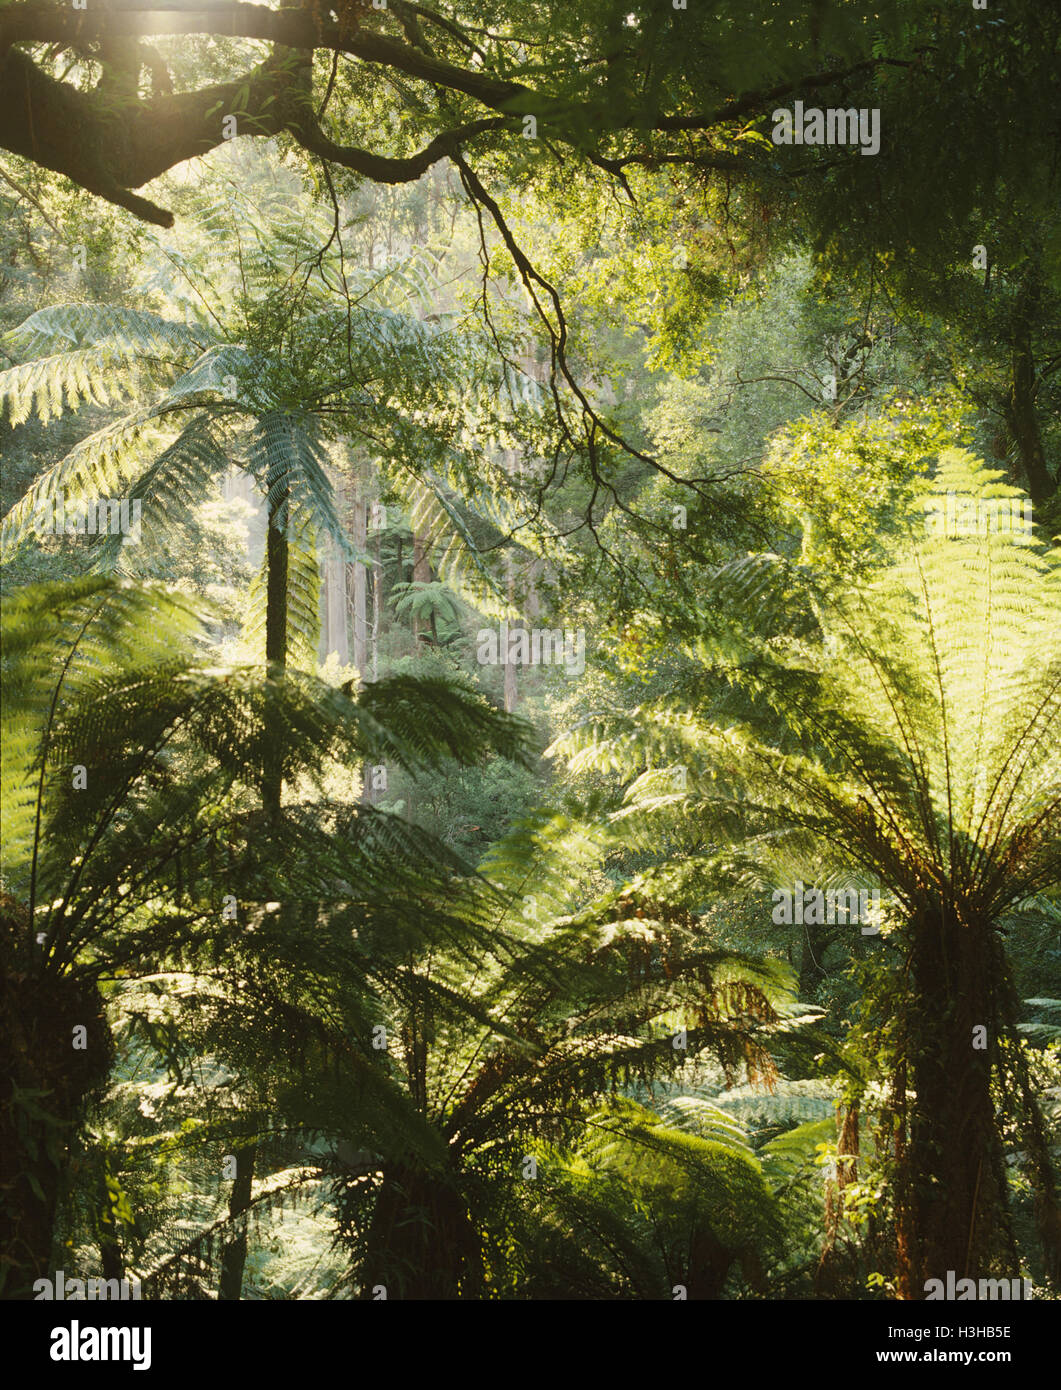 Tree ferns in cool temperate rainforest including Rough tree ferns (Cyathea australis) Stock Photo